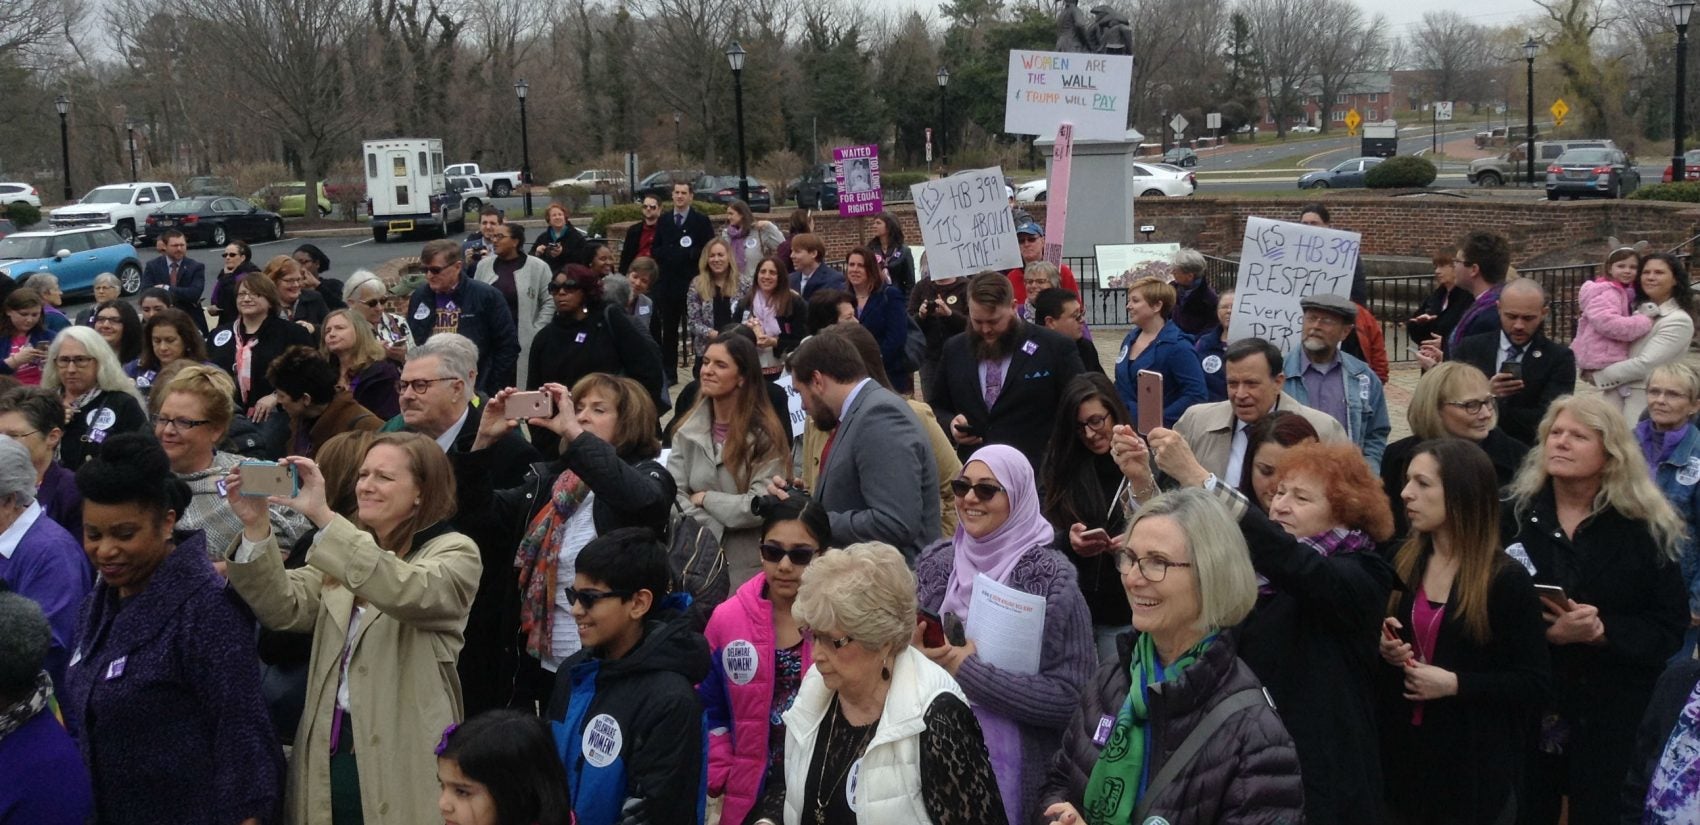 A big crowd shows support for the Equal Rights Amendment outside Legislative Hall in Dover. (Zoe Read/WHYY) 